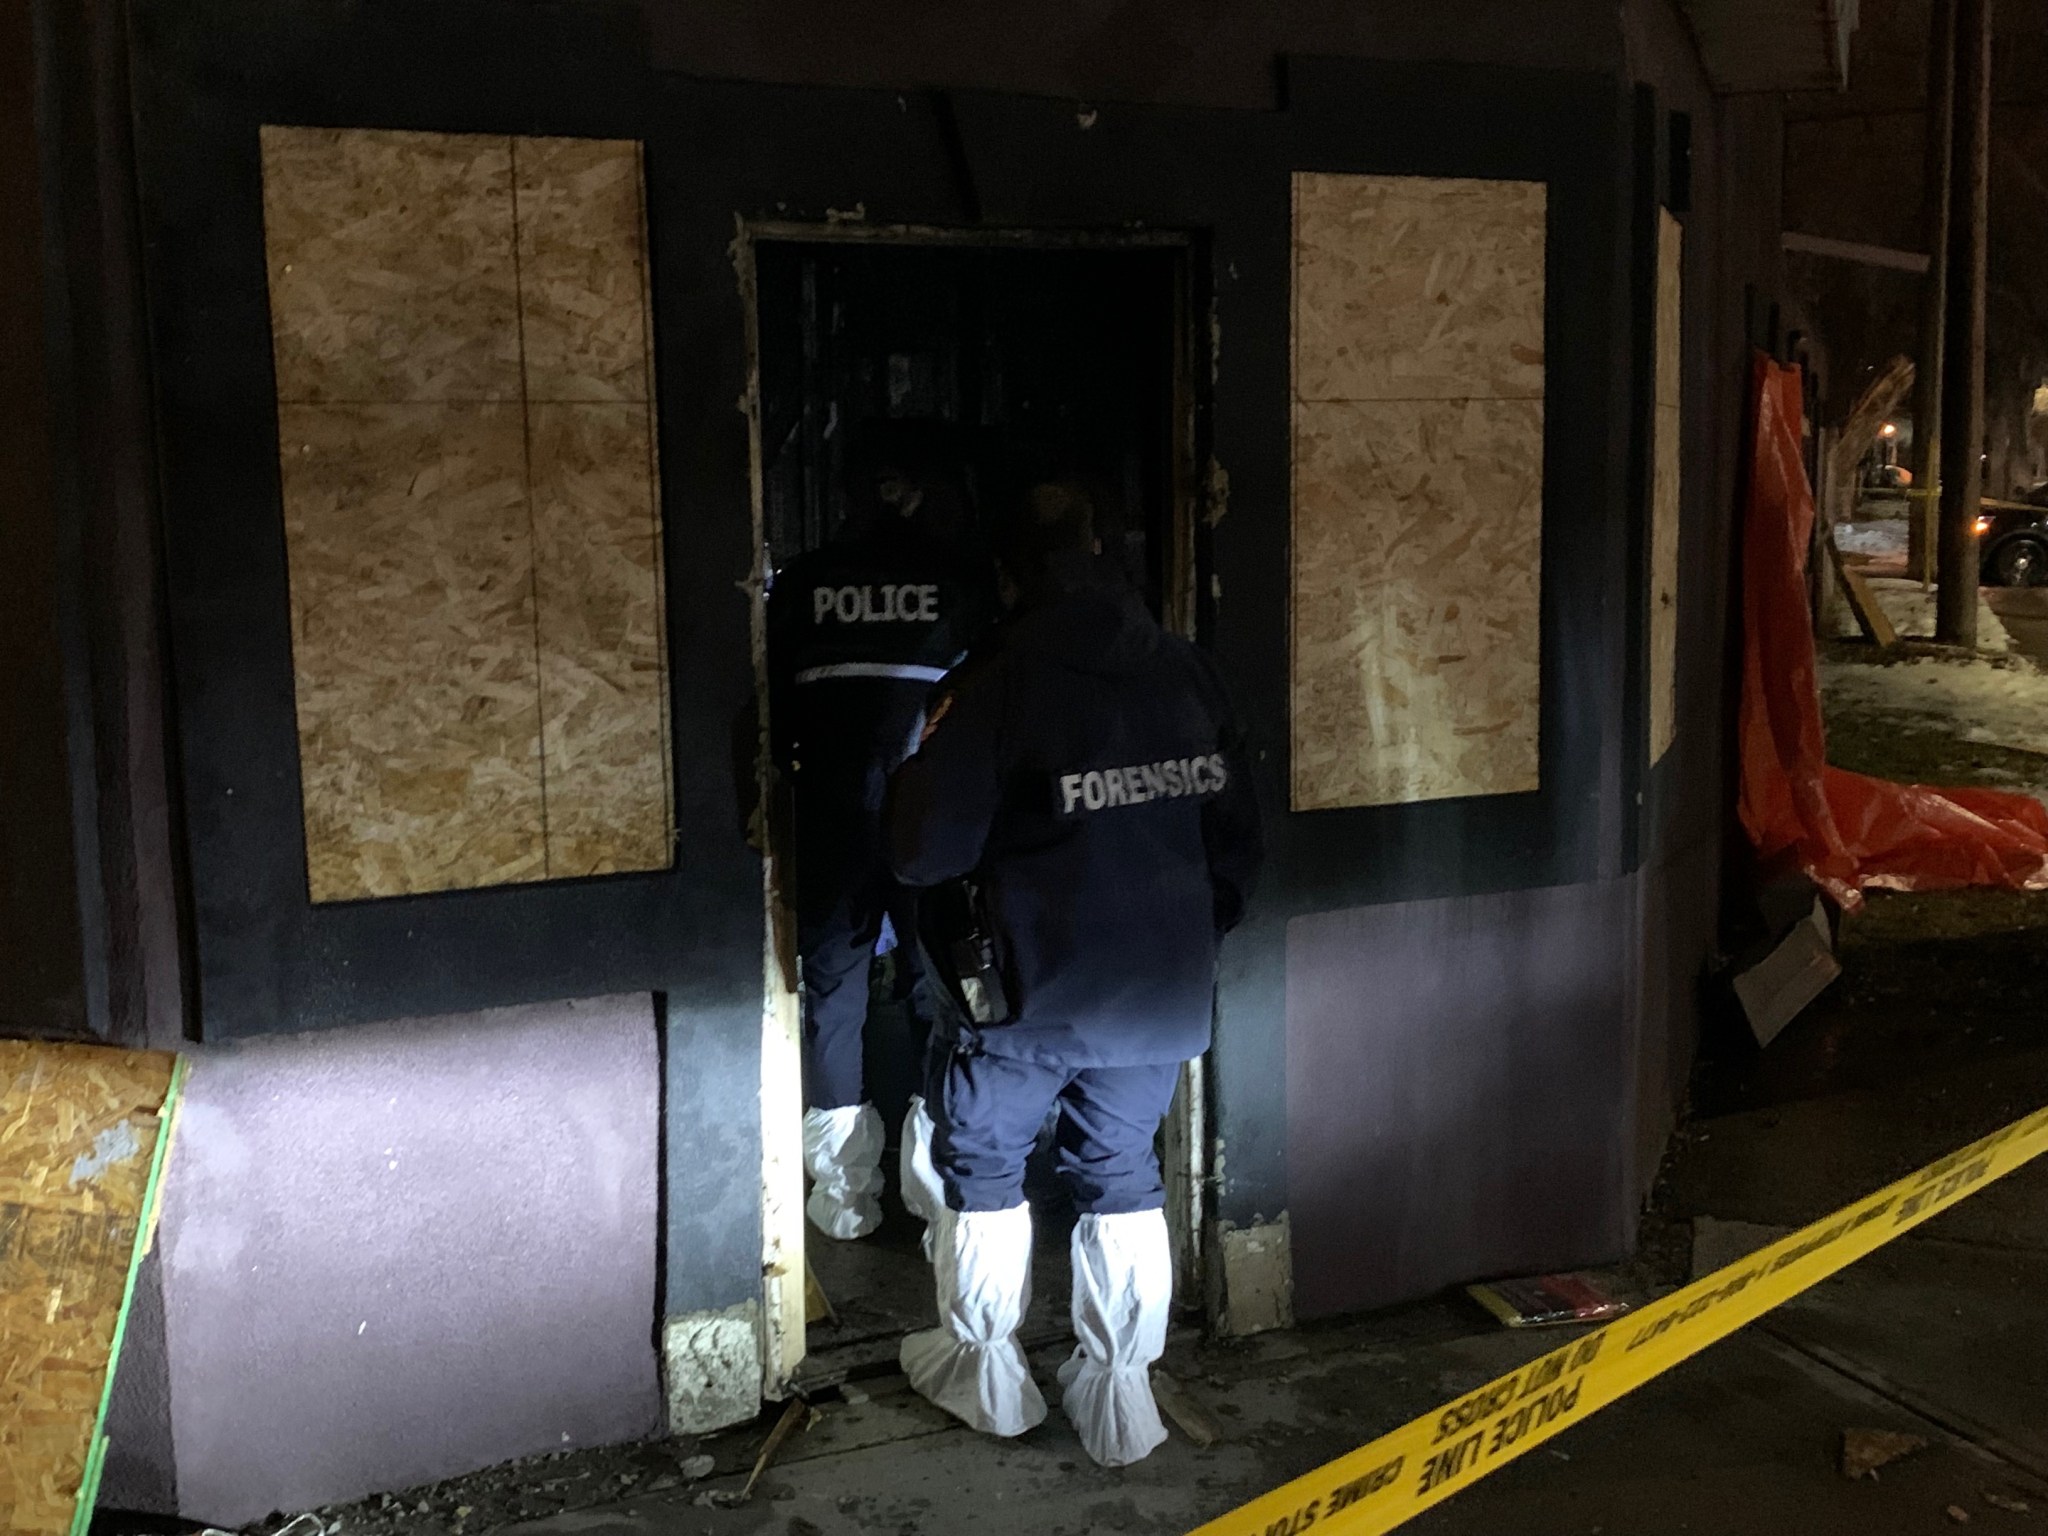 Edmonton Police Service investigators on scene after a man’s body was found in an burnt building at the corner of 95 Street and 106 Avenue in the central Edmonton McCauley neighbourhood on Wednesday, December 1, 2021.